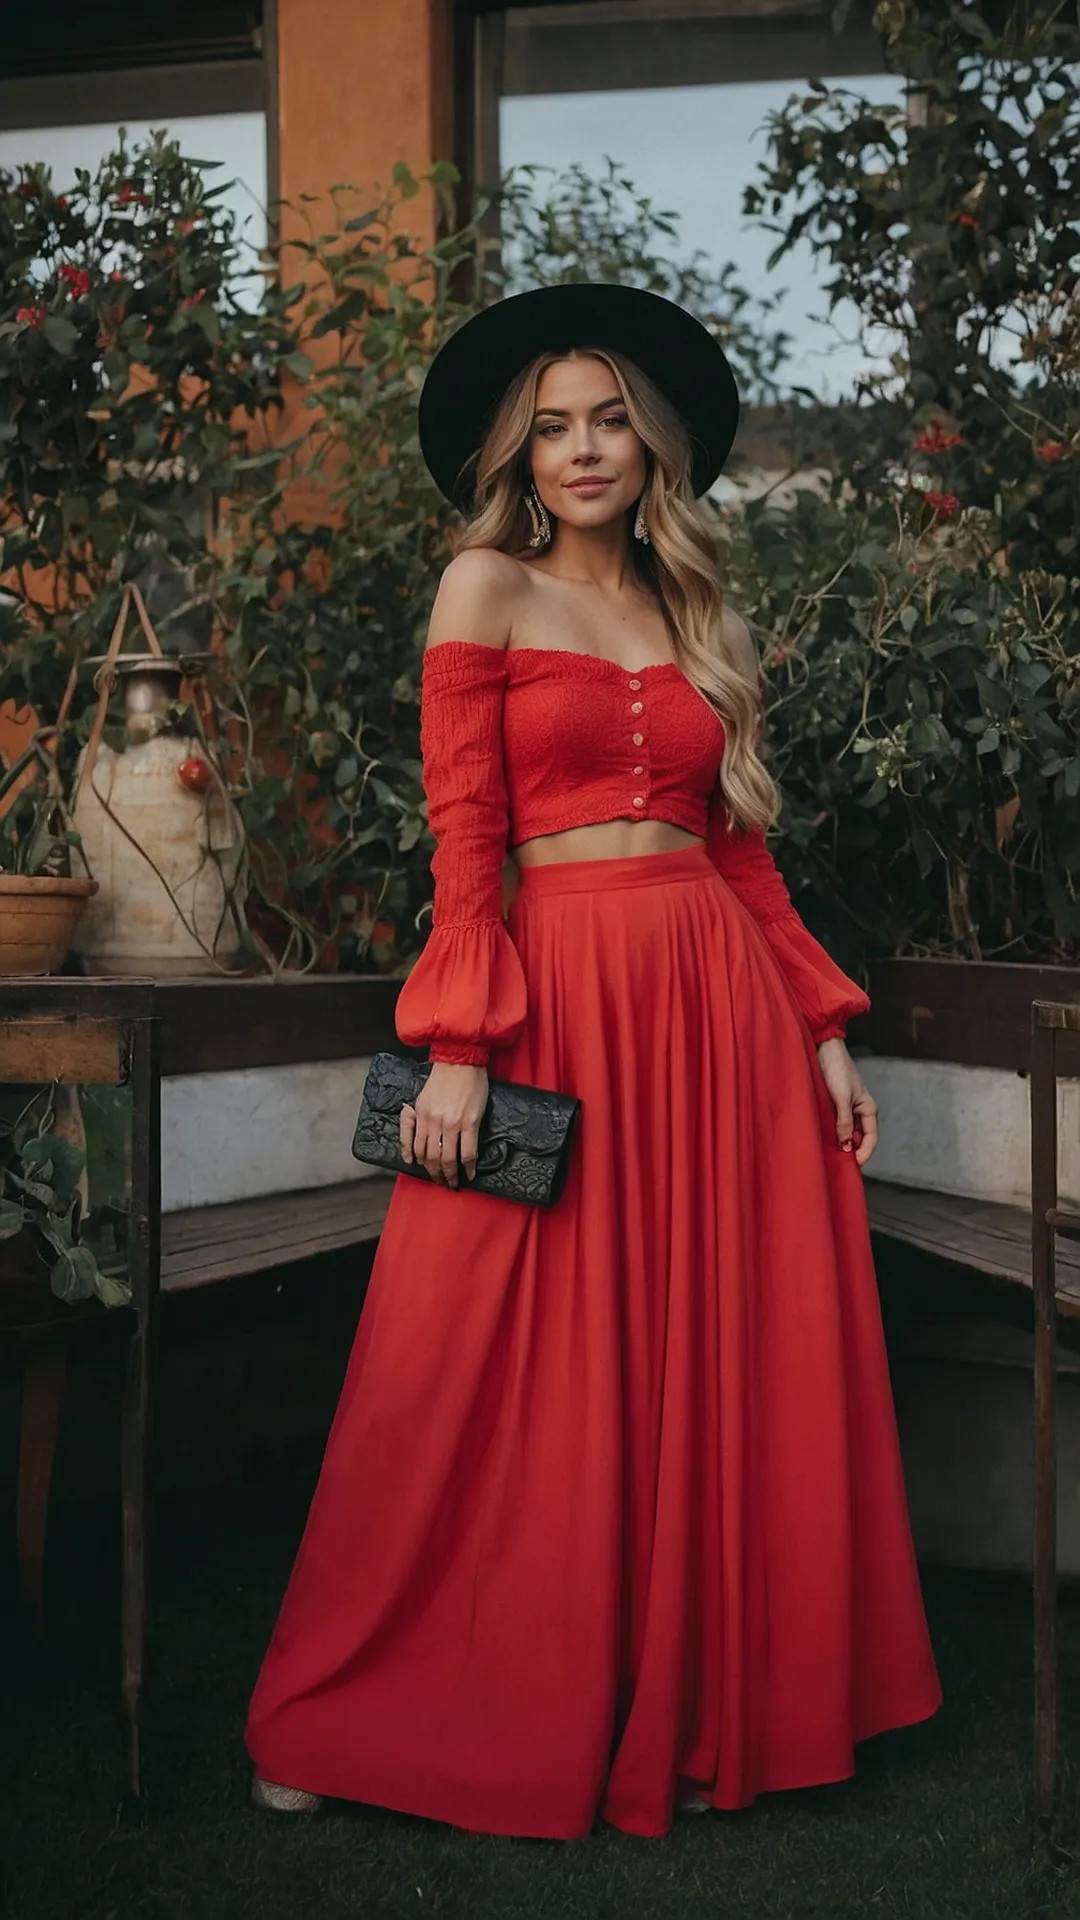 Rose Red Reverie: Dreamy Women's Outfits in Red